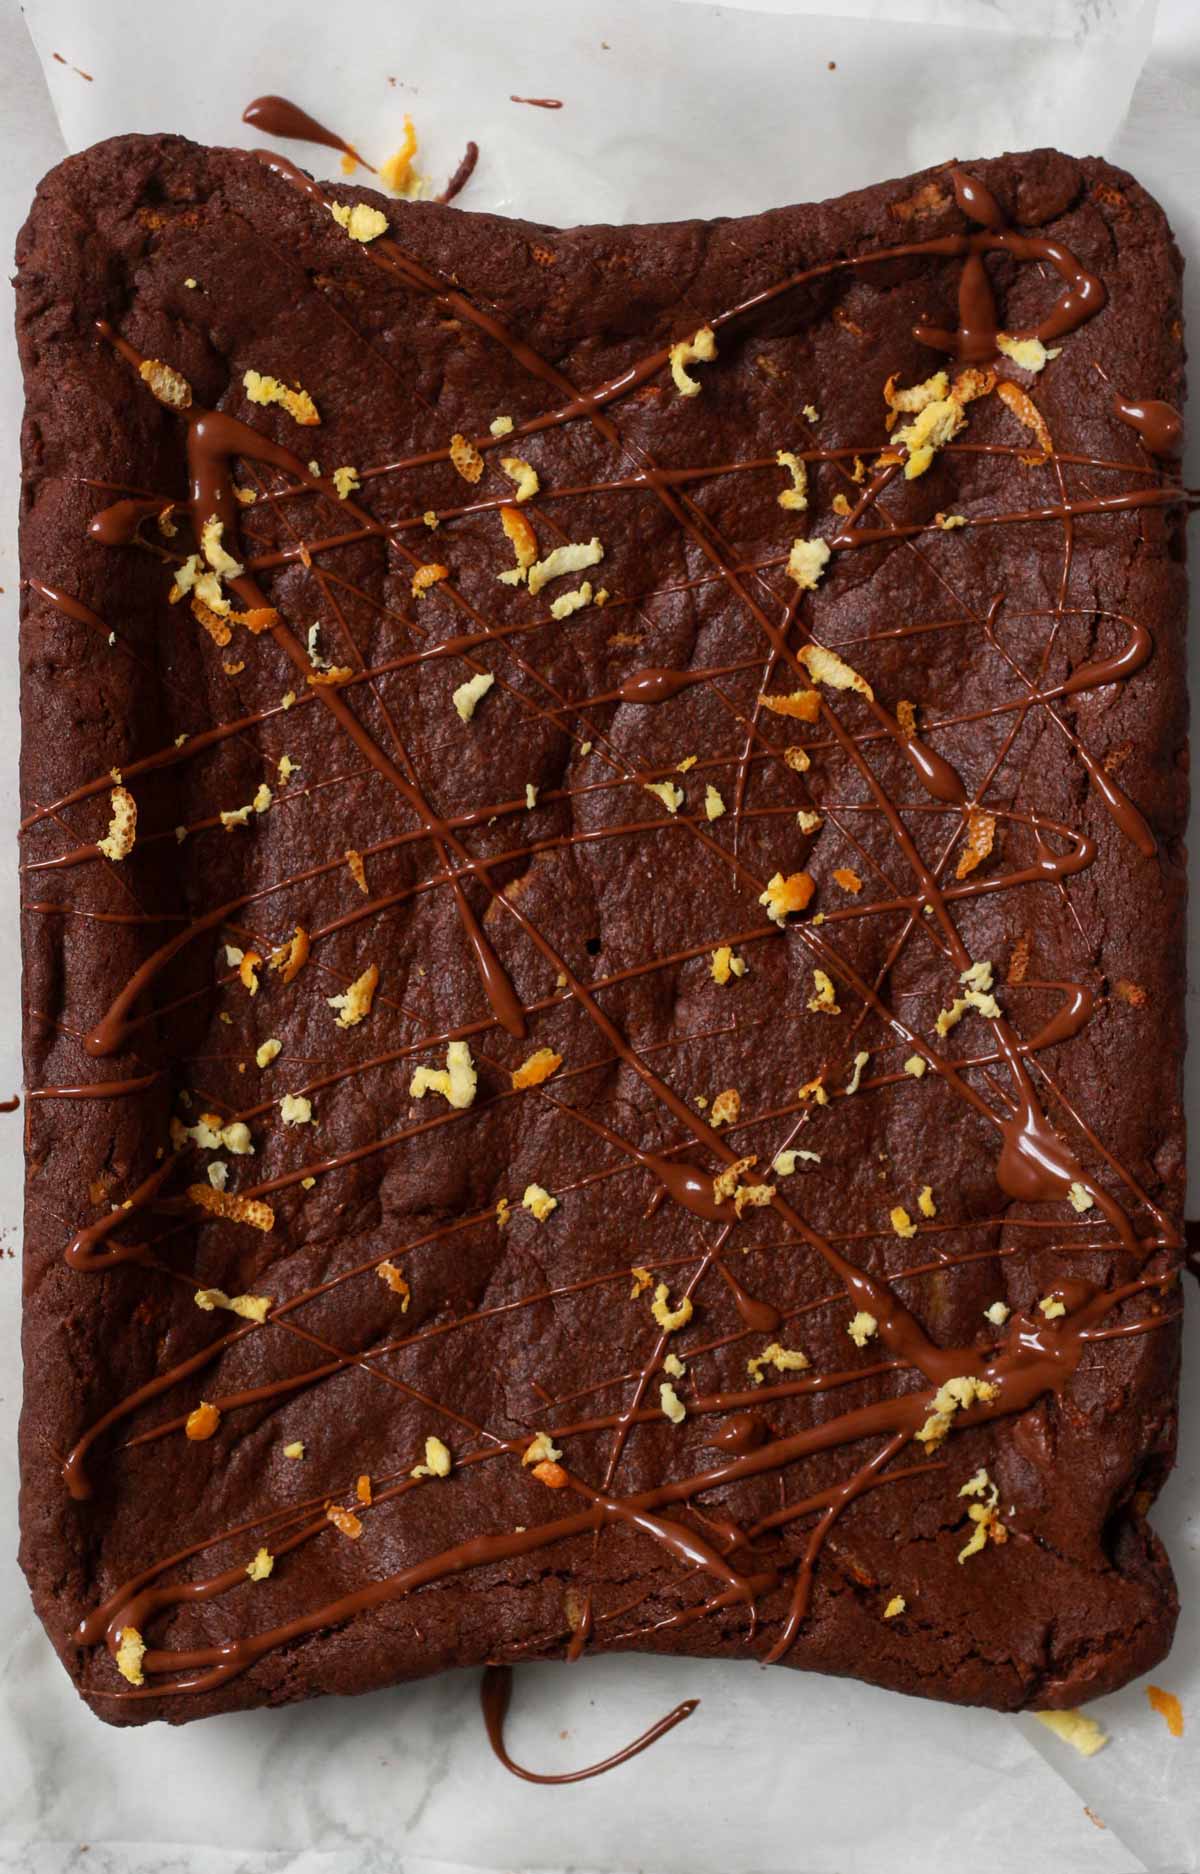 Slab Of Baked Cookie With Chocolate Drizzle And Orange Zest On Top